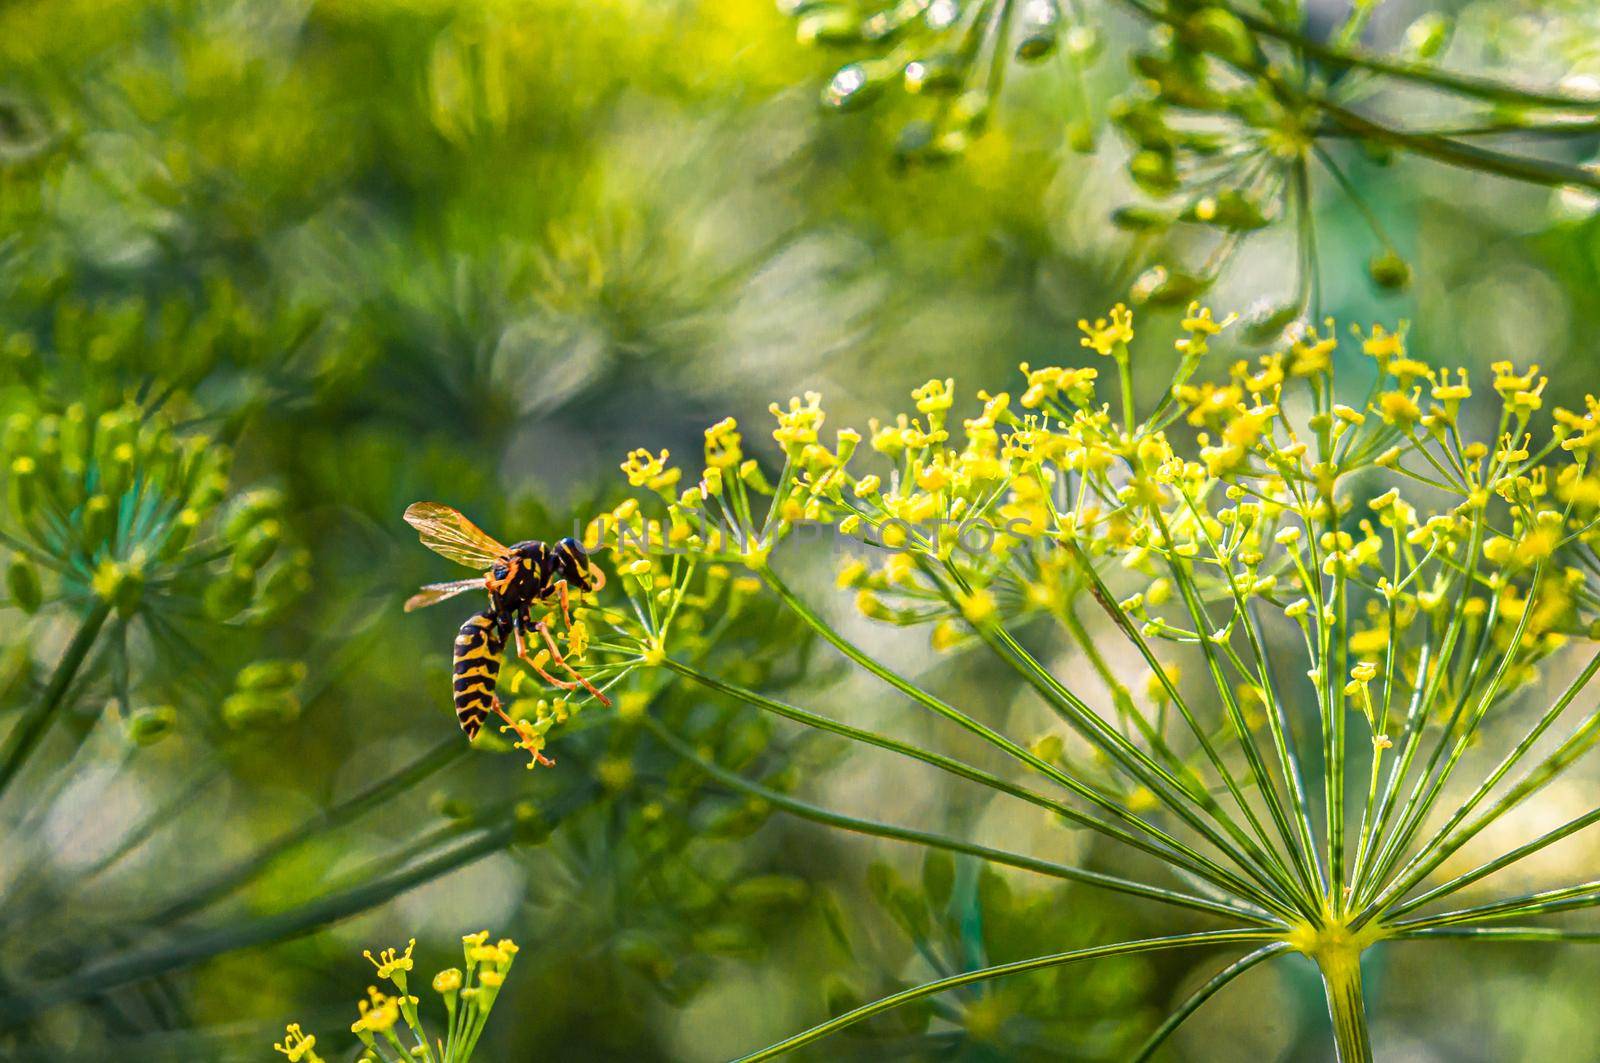 A wasp drinks nectar from a dill flower by ben44